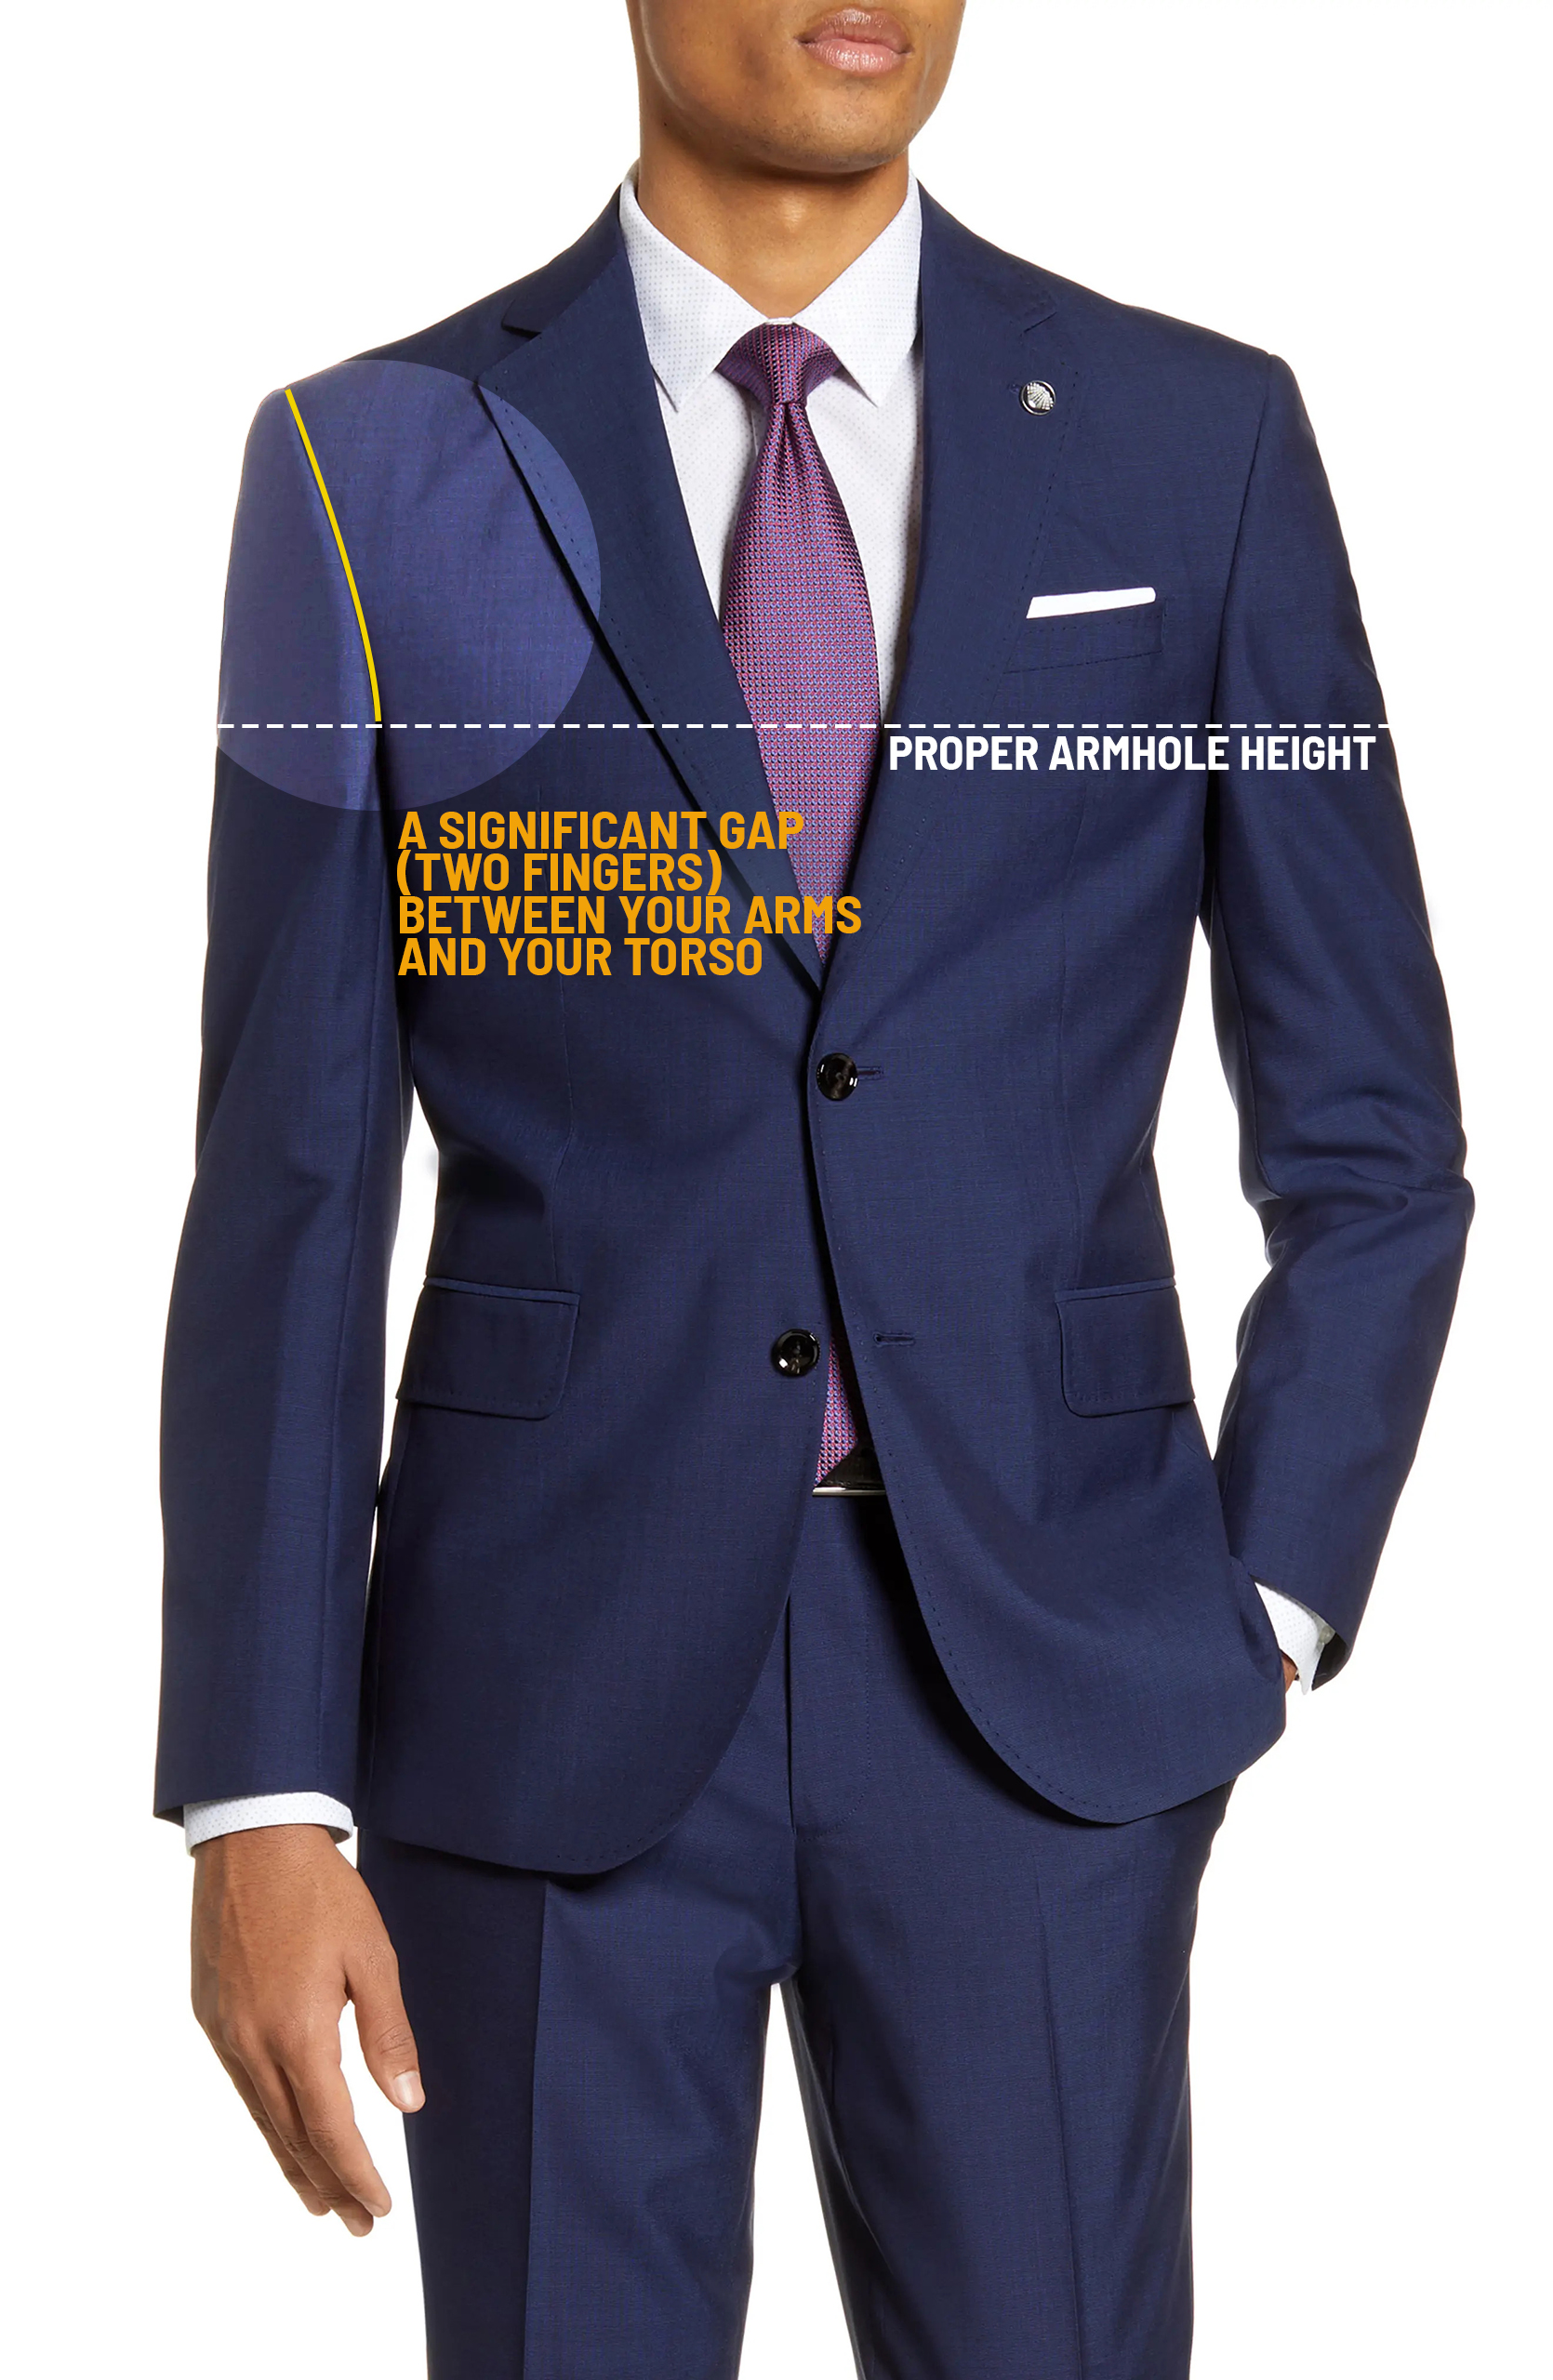 Proper suit jacket armholes placement and height